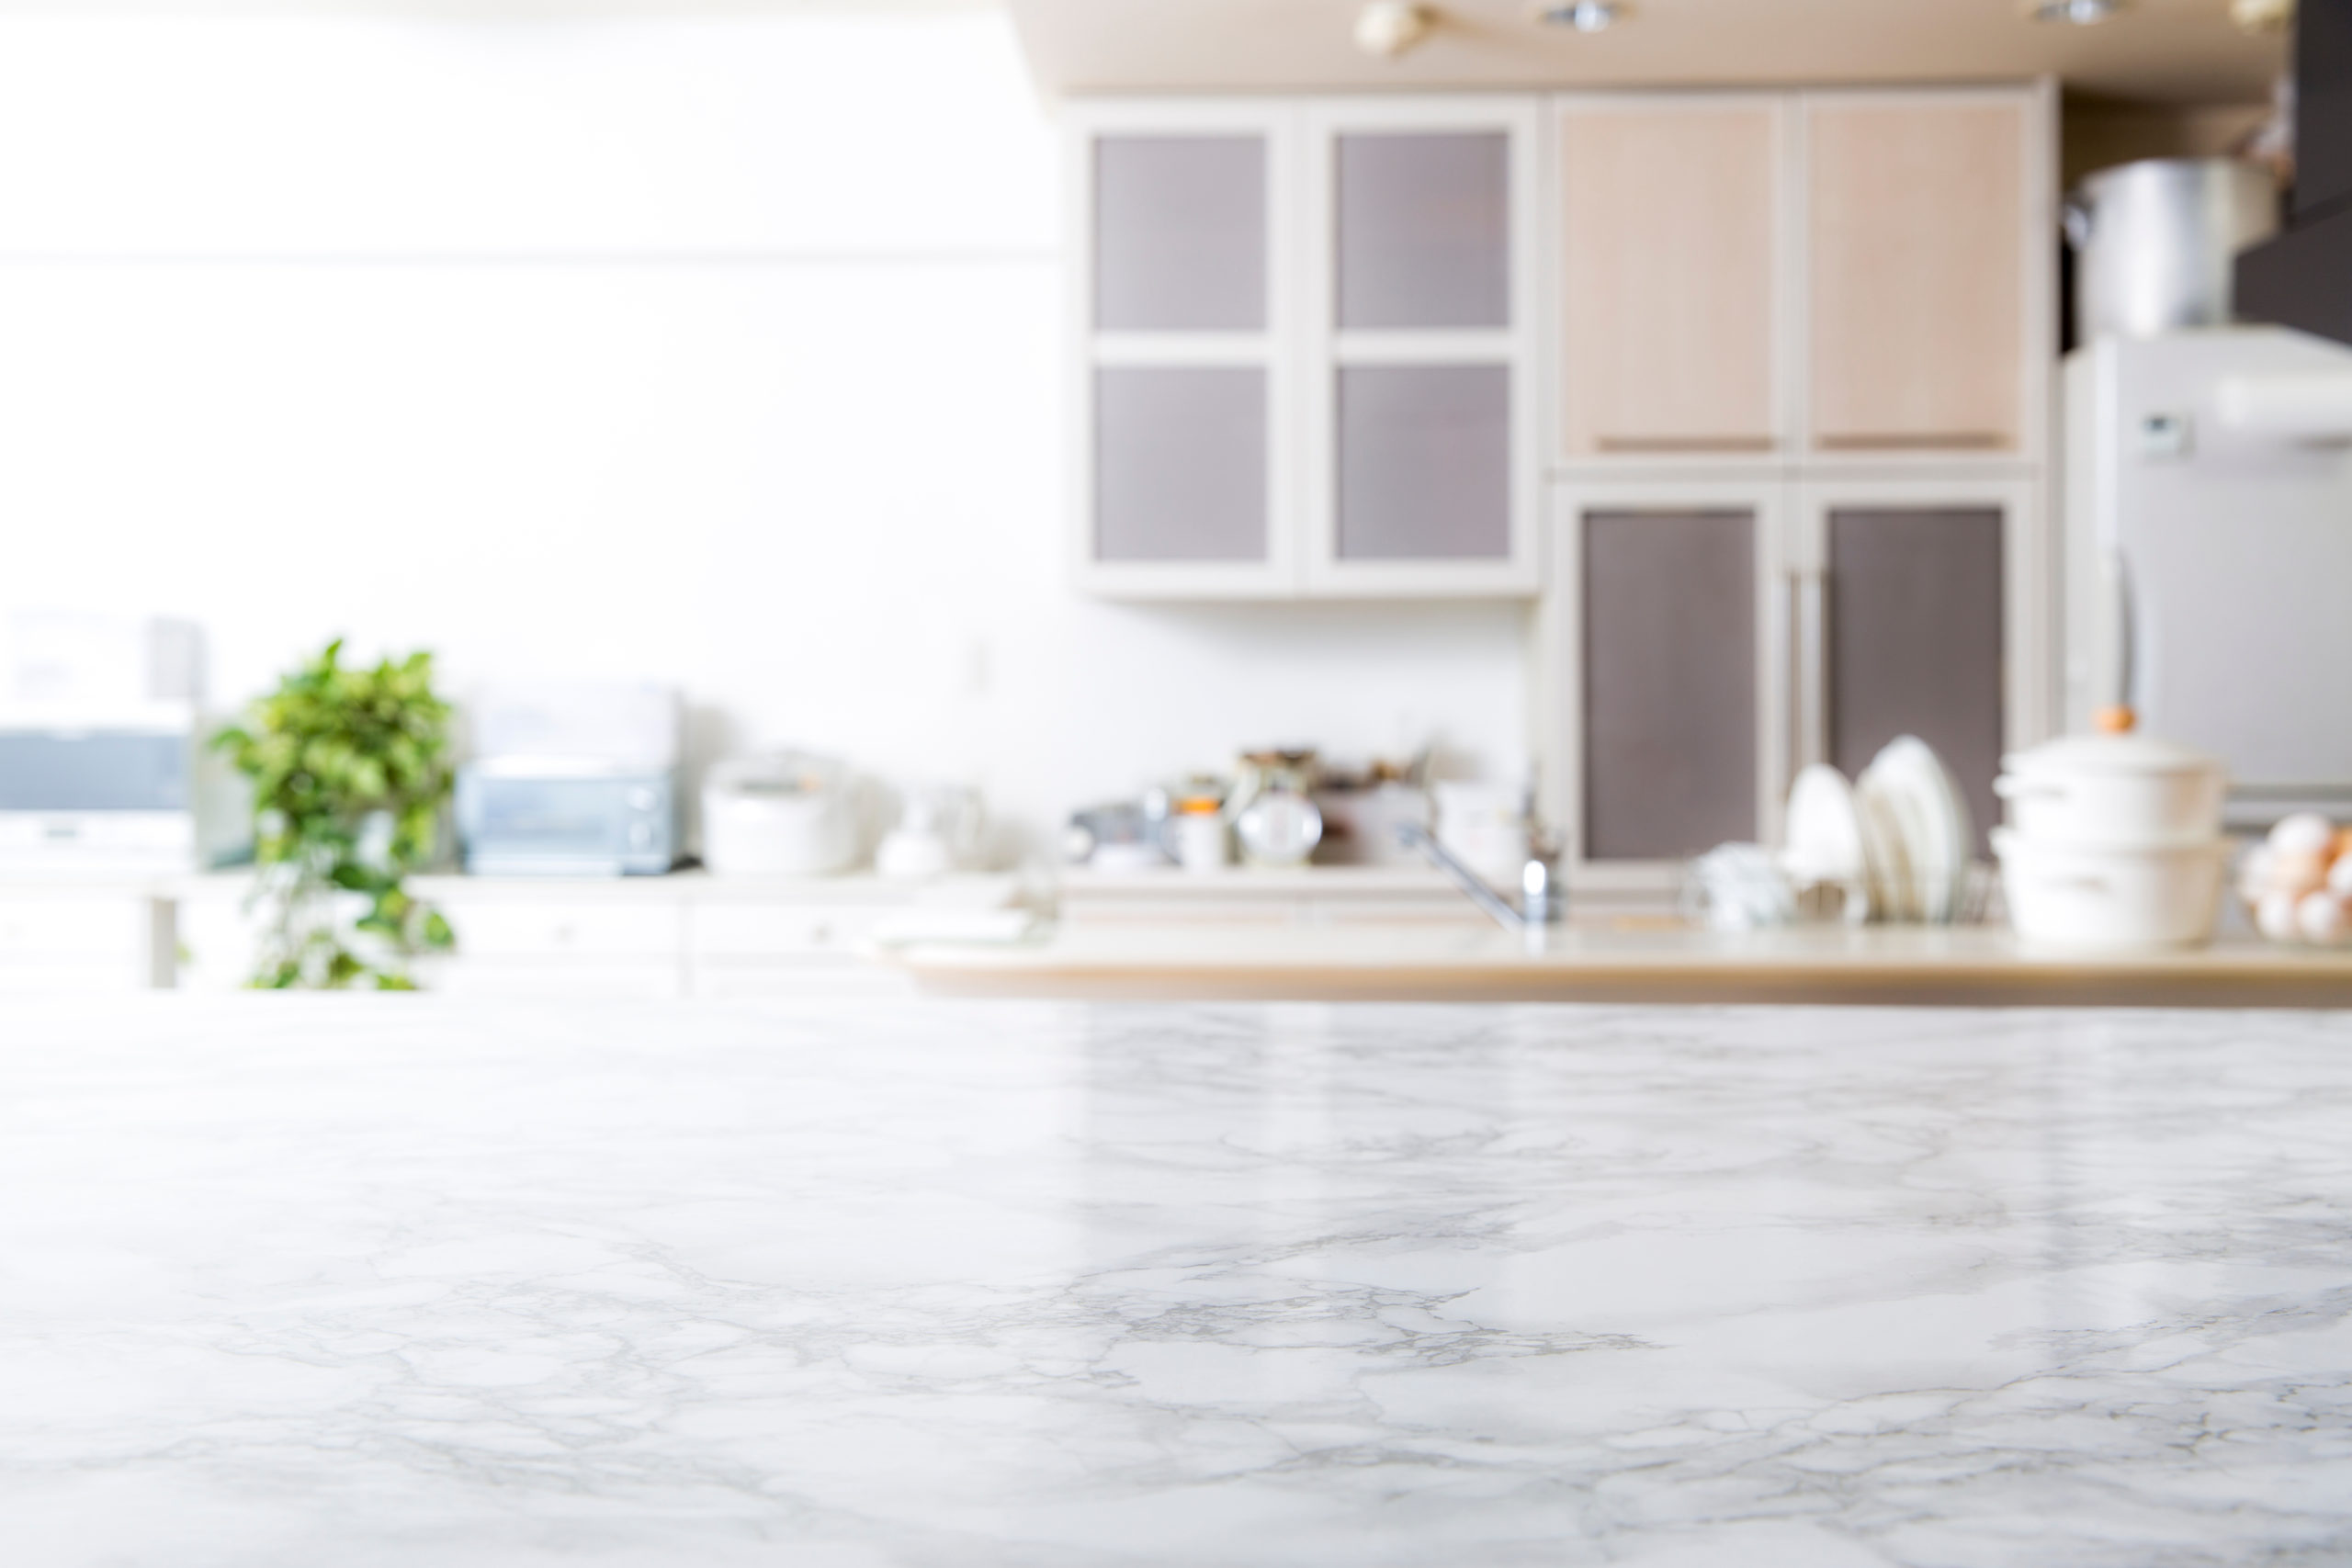 5 Types of Kitchen Countertops That Are in Right Now